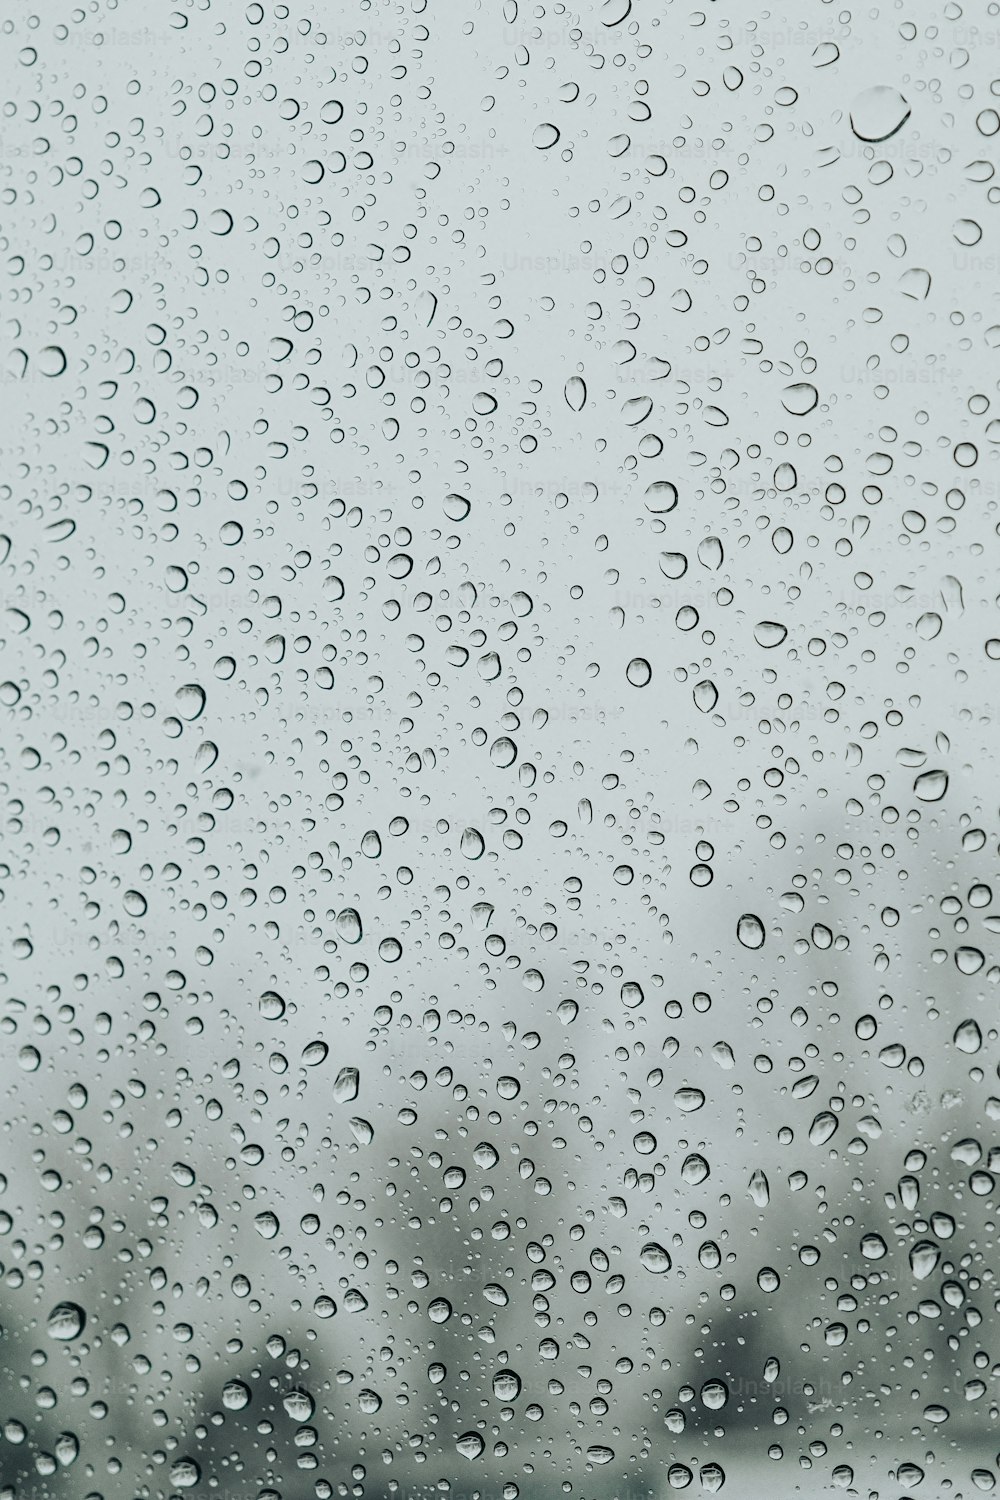 rain drops on a window with trees in the background